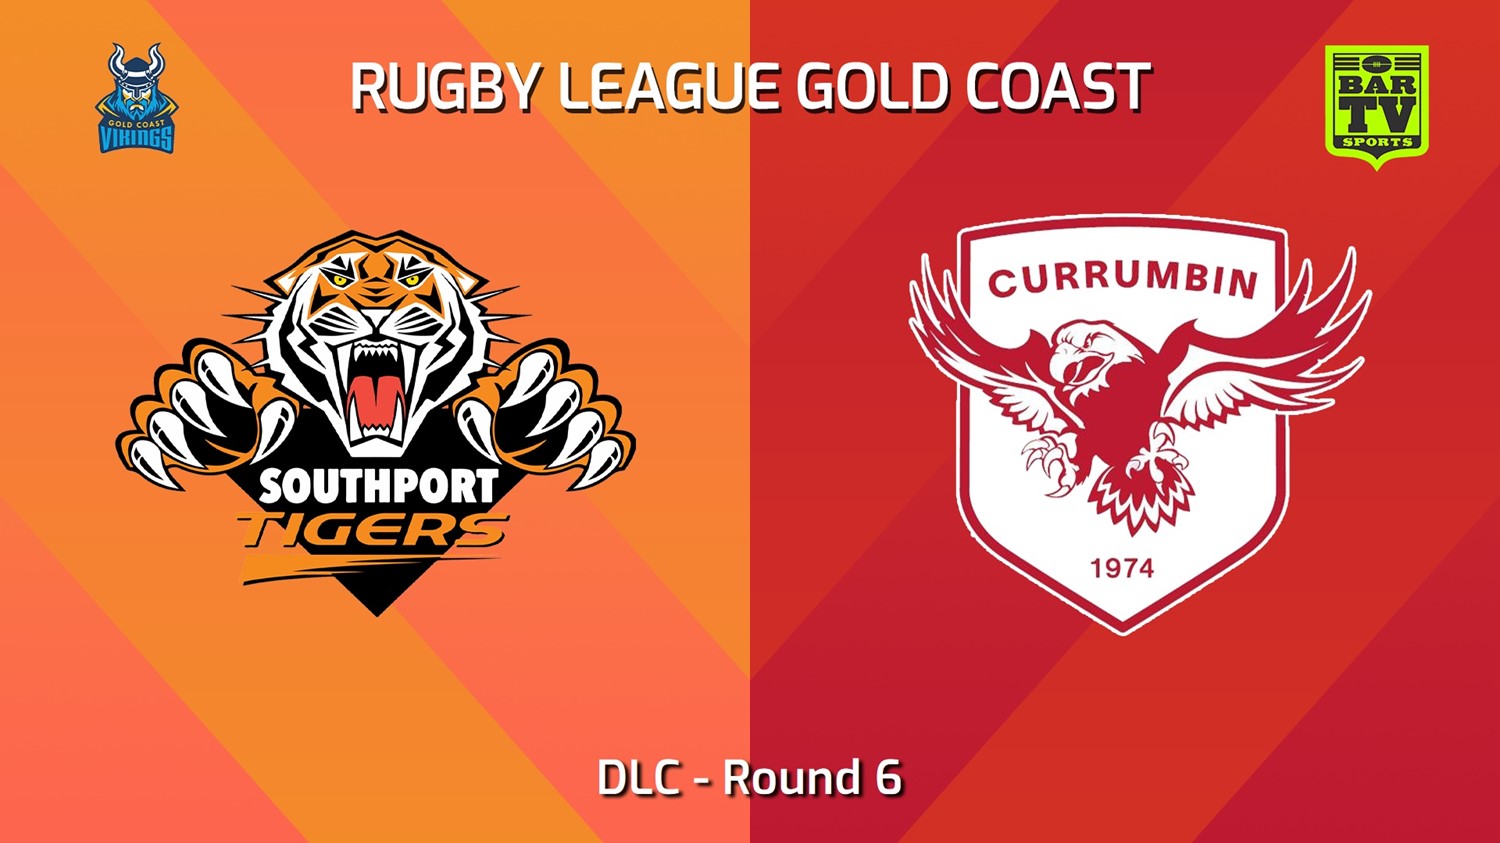 240602-video-Gold Coast Round 6 - DLC - Southport Tigers v Currumbin Eagles Slate Image